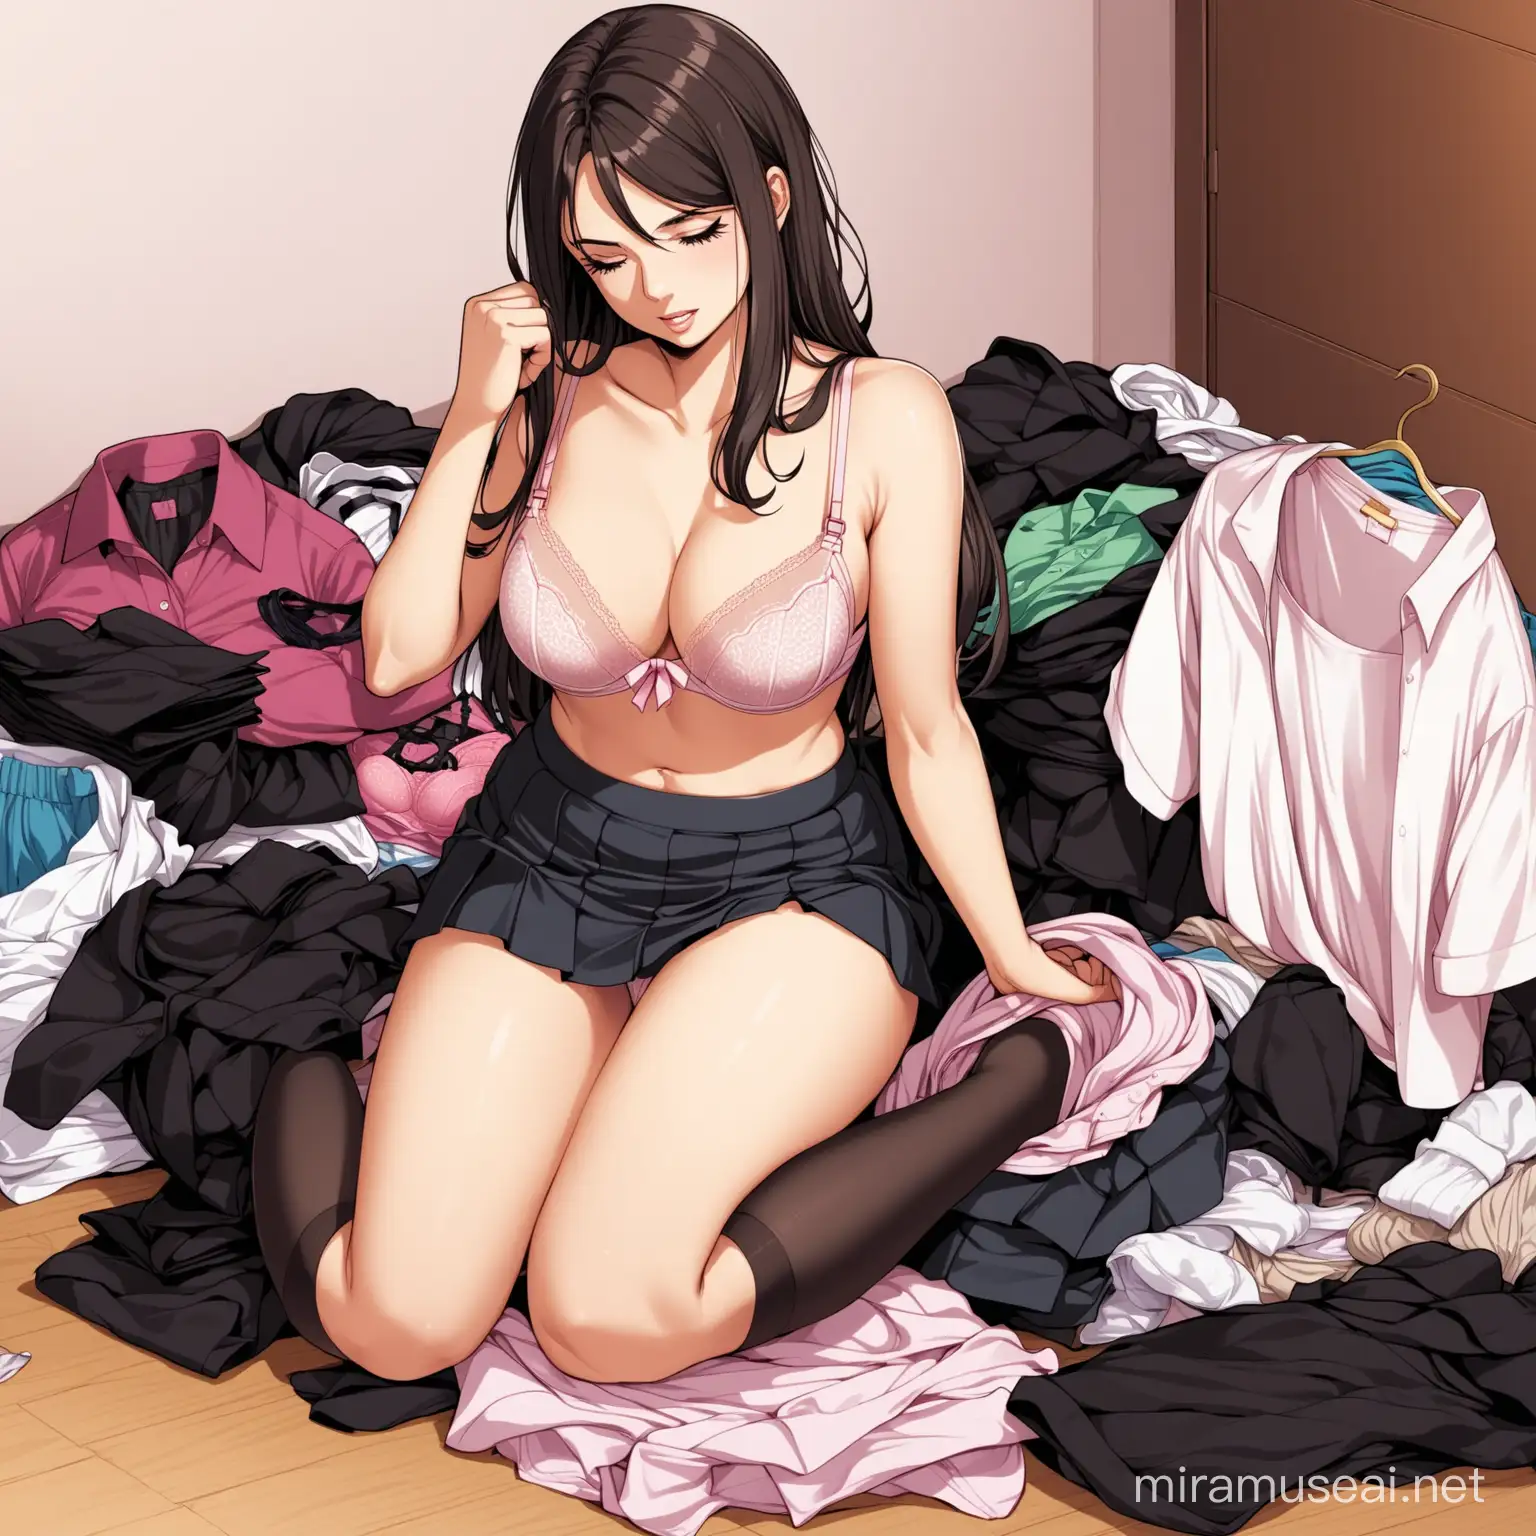 Woman Undressing in Pile of Discarded Clothes